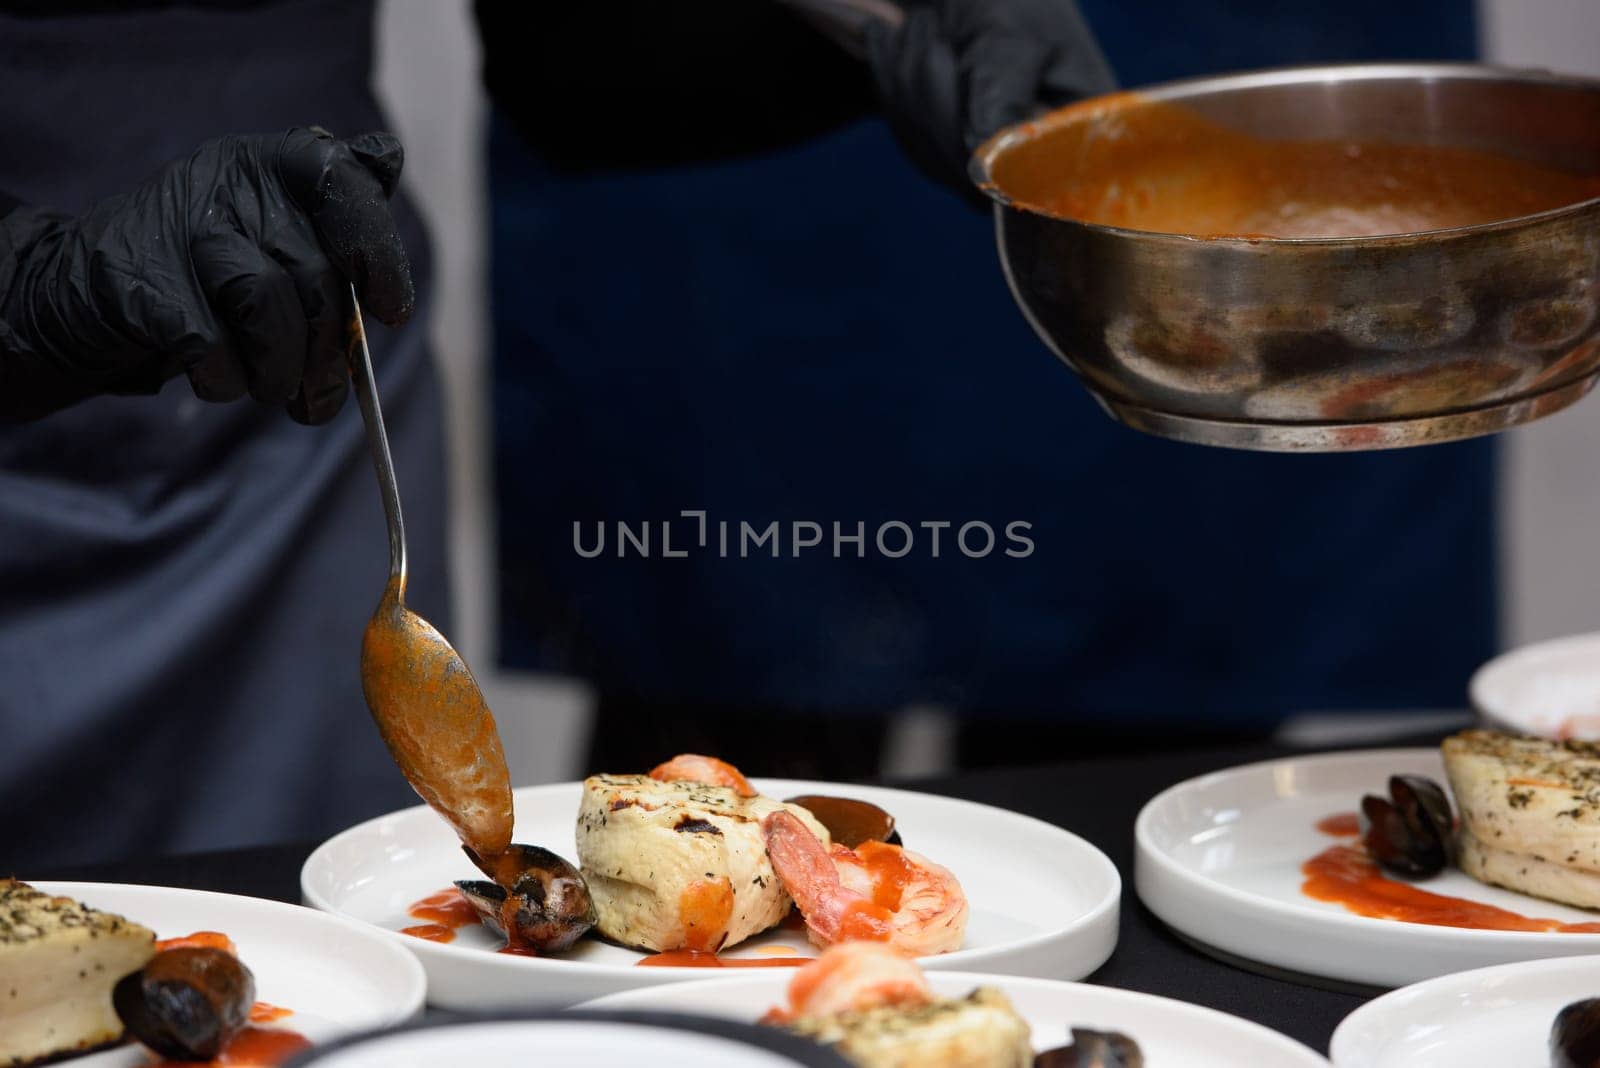 chef in the restaurant prepares saganaki, traditional Greek cheese snack that is fried in a pan or grilled by Ashtray25